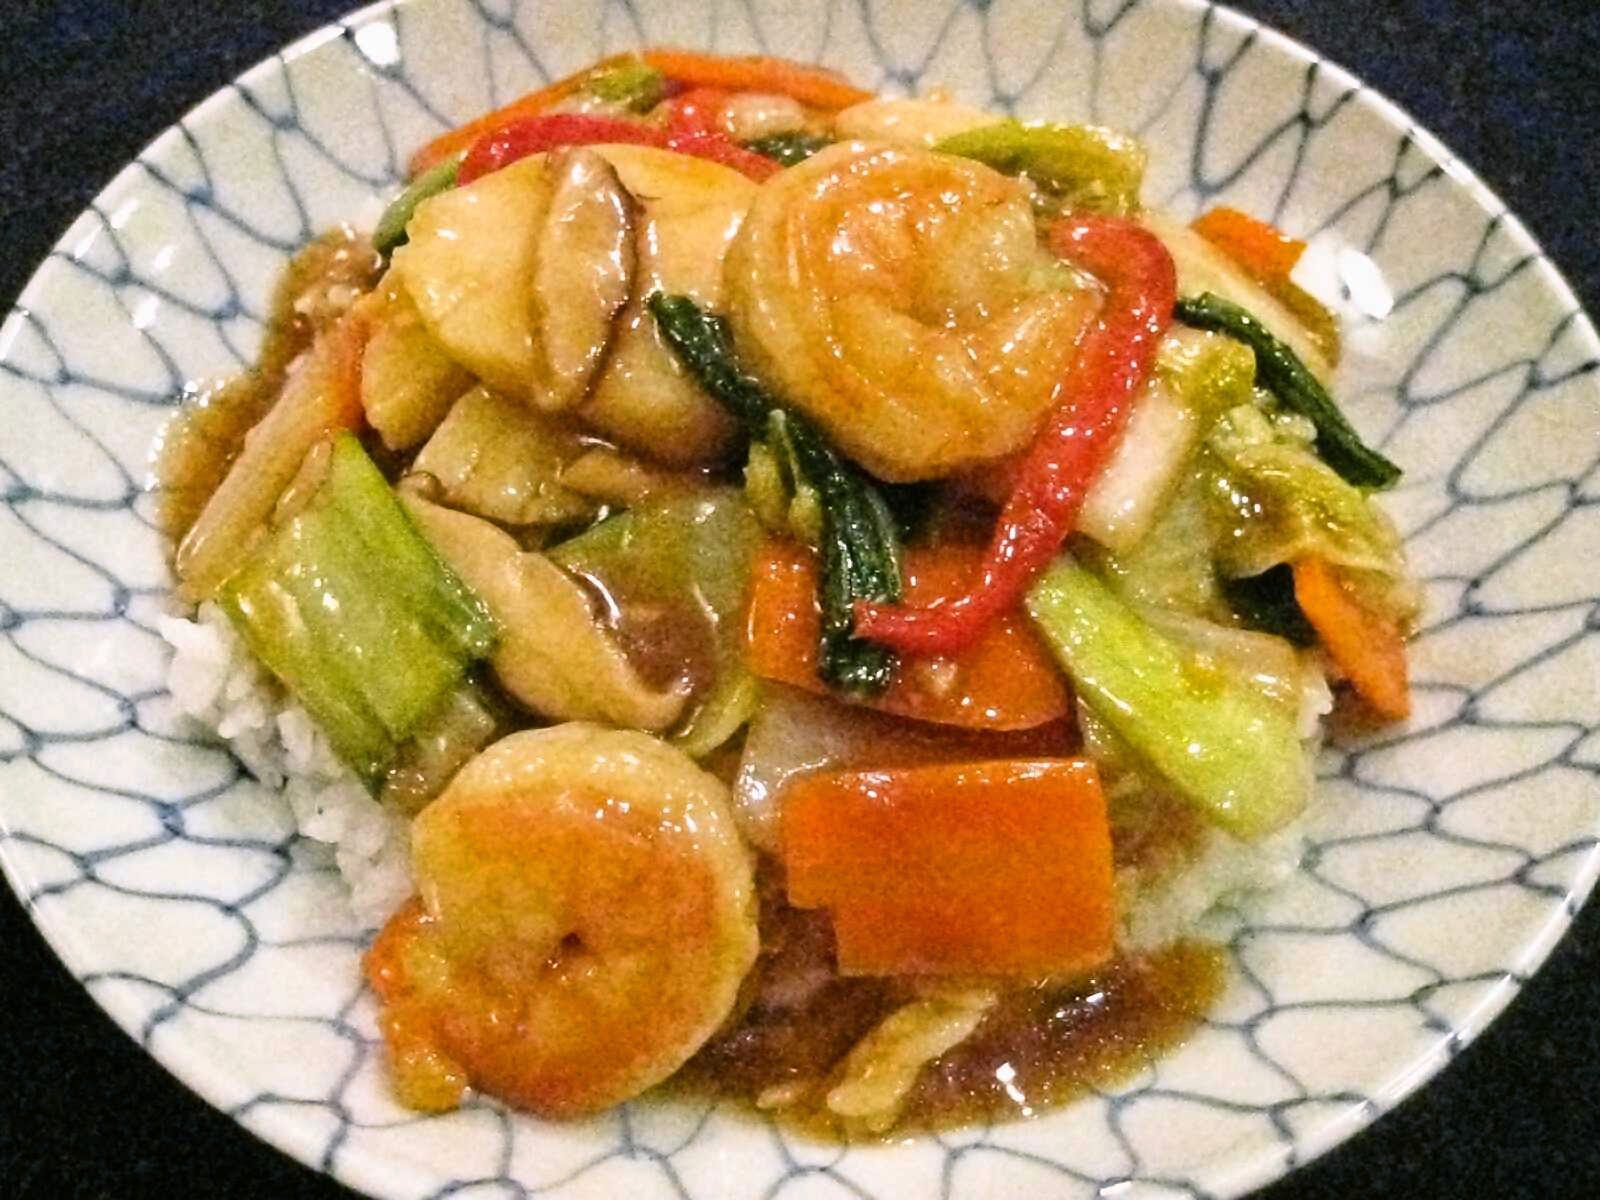 Recipes for Tom: Chukadon / Chinese-style saute with sauce over steamed ...